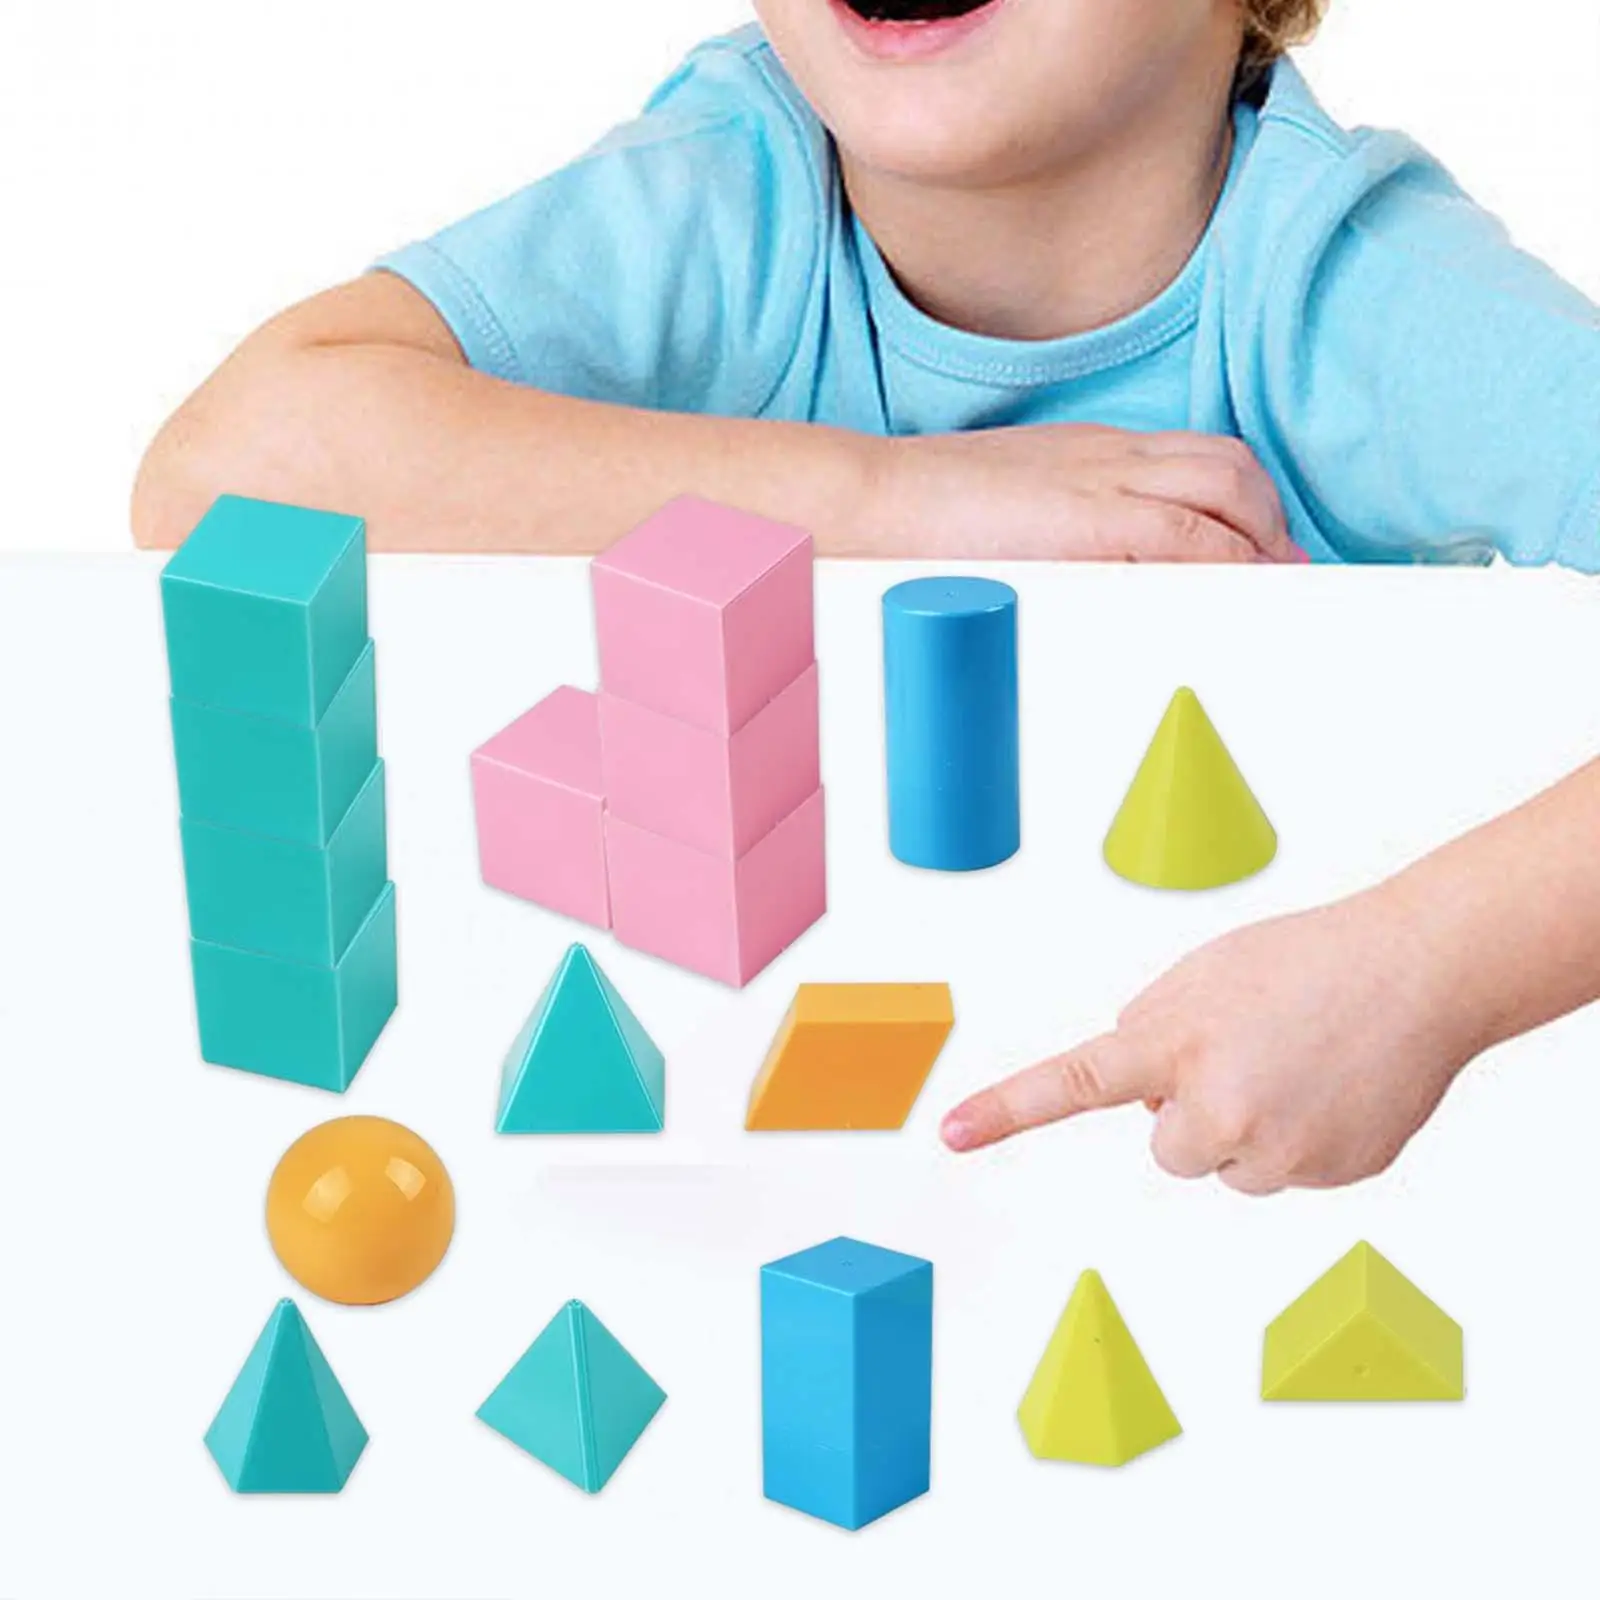 

Montessori Toy Educational Toy Spatial Logical Thinking Geometric Mold Board Game for Classroom Bedroom Home Use Birthday Gifts